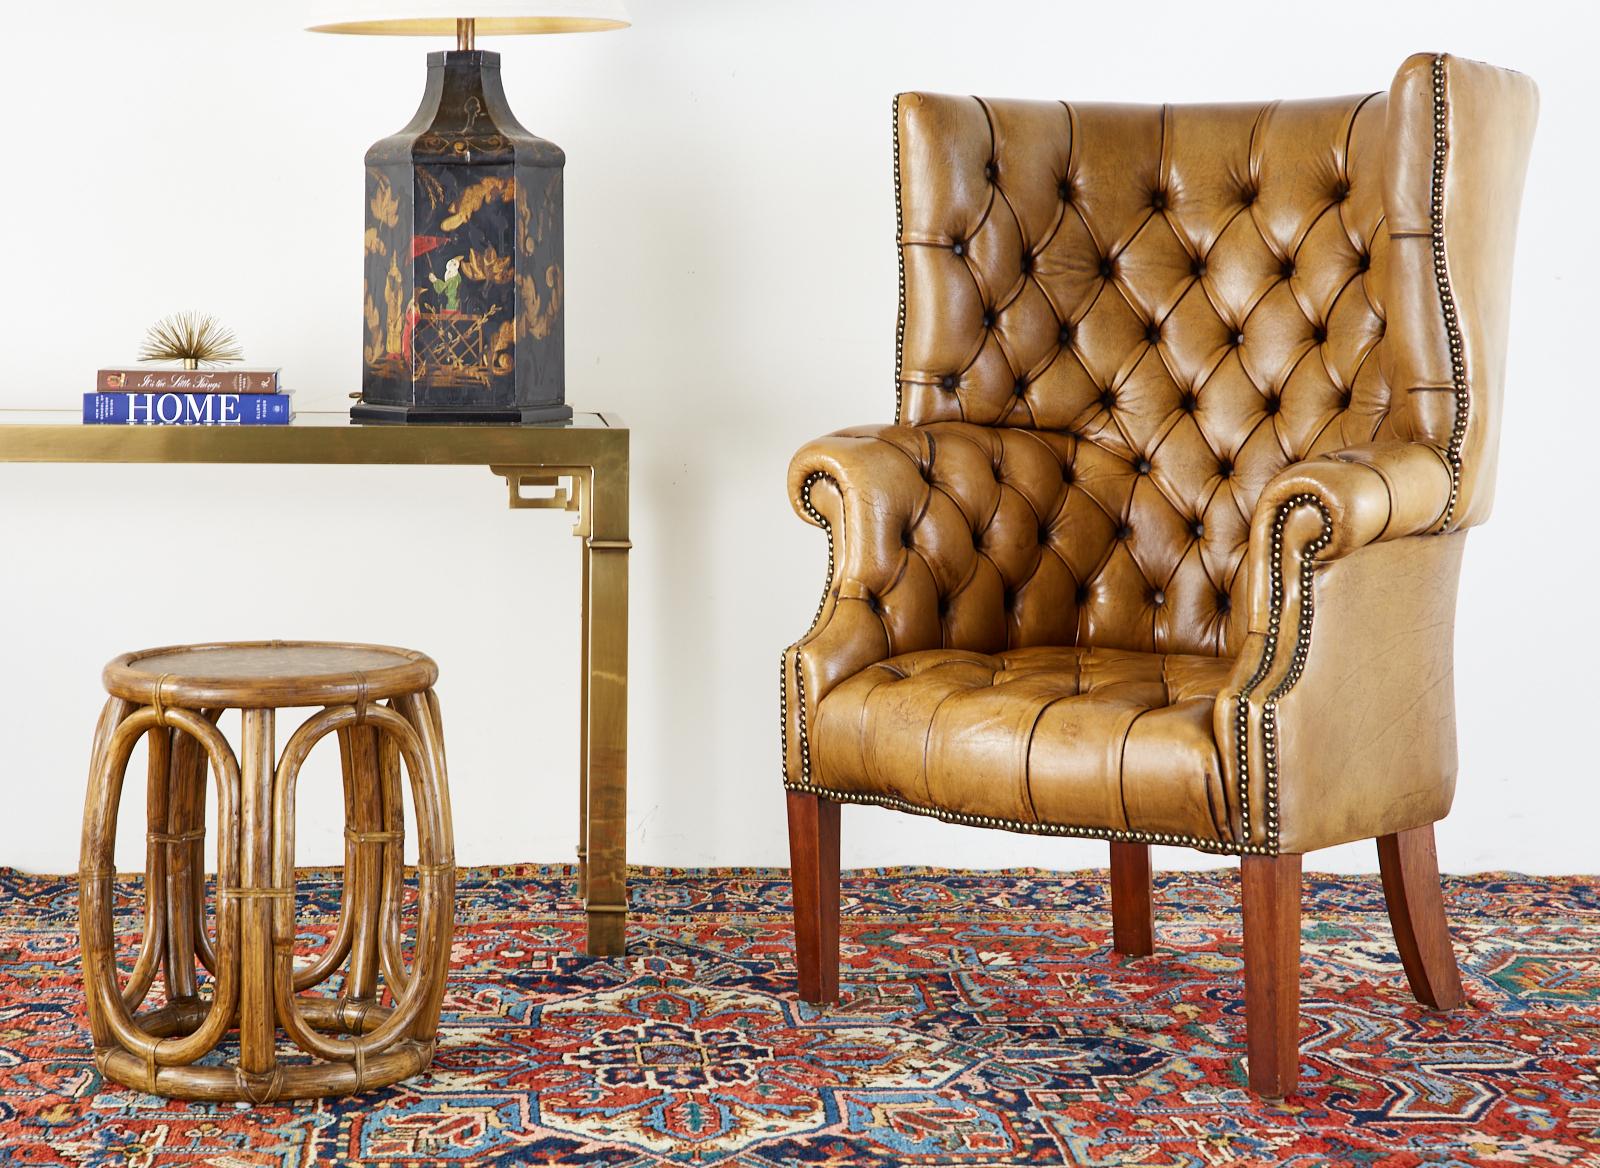 Rare pair of handsome English porters wingback armchairs or library chairs made in the Georgian taste. Featuring a rich, tufted brown cigar leather upholstery that has faded into a warm cafe ole tone. The leather is bordered with brass tack nail